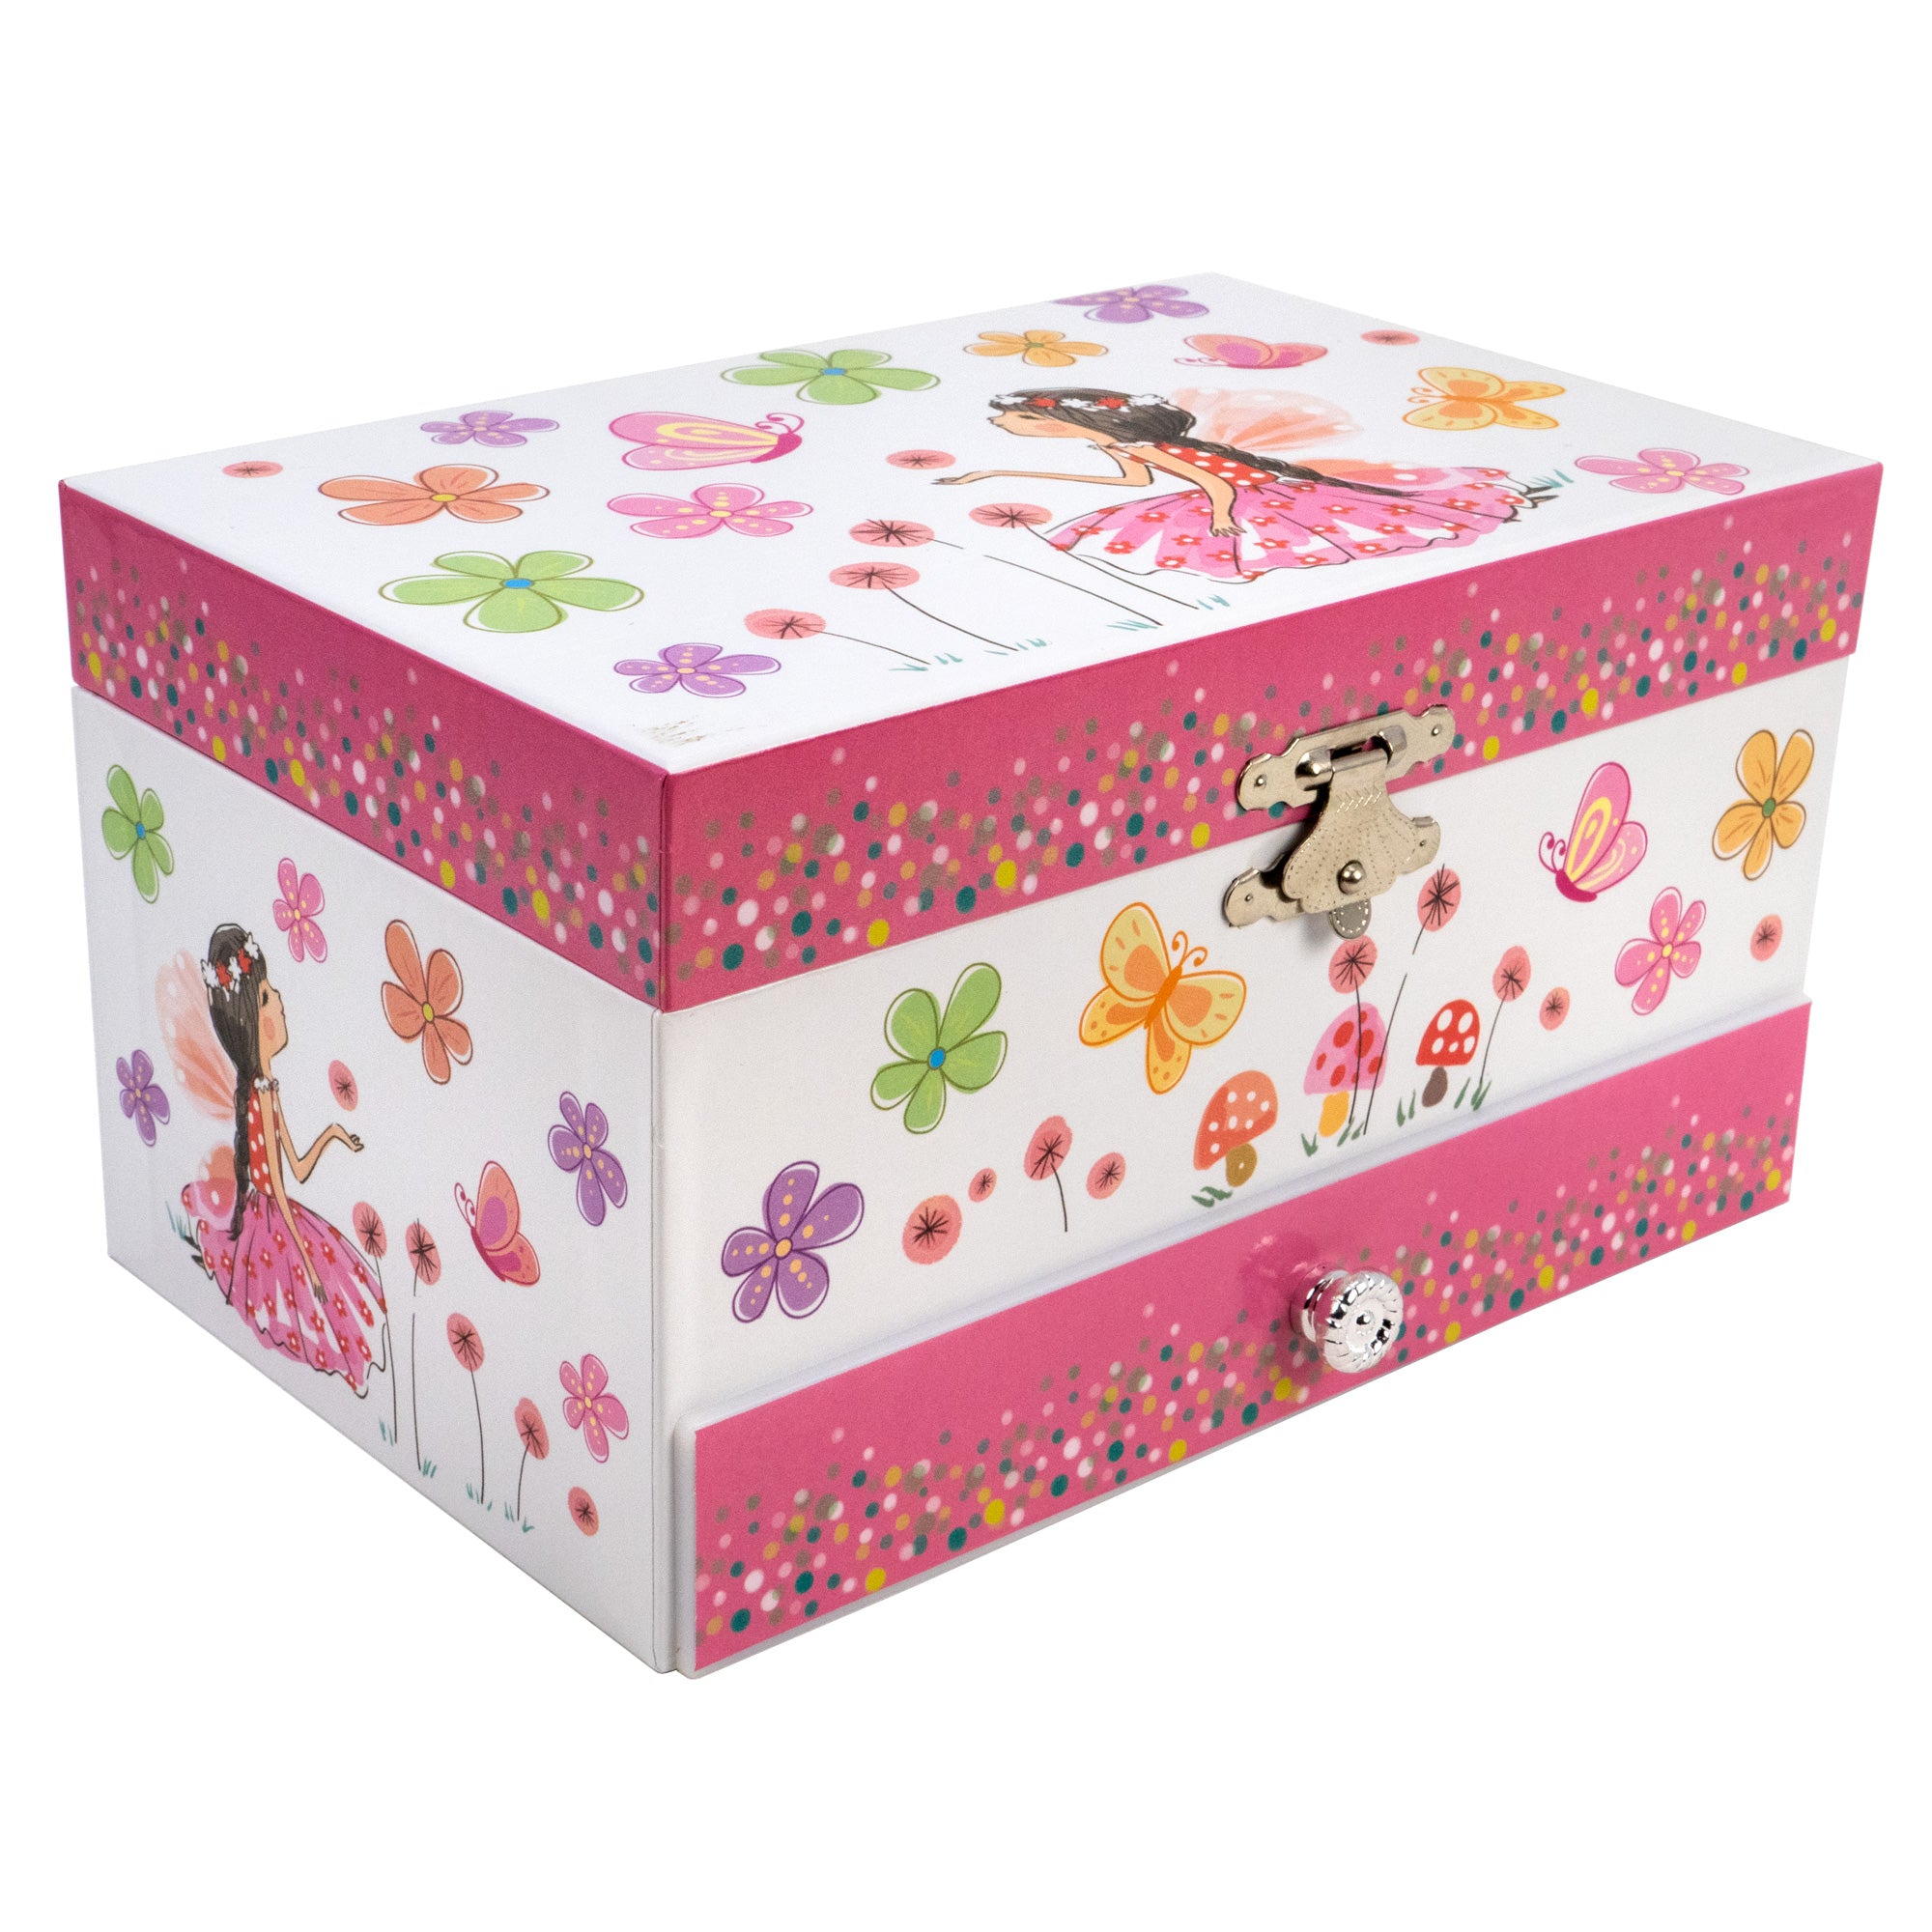 San Francisco Music Box Company Classic Floral Musical Wooden Jewelry Box